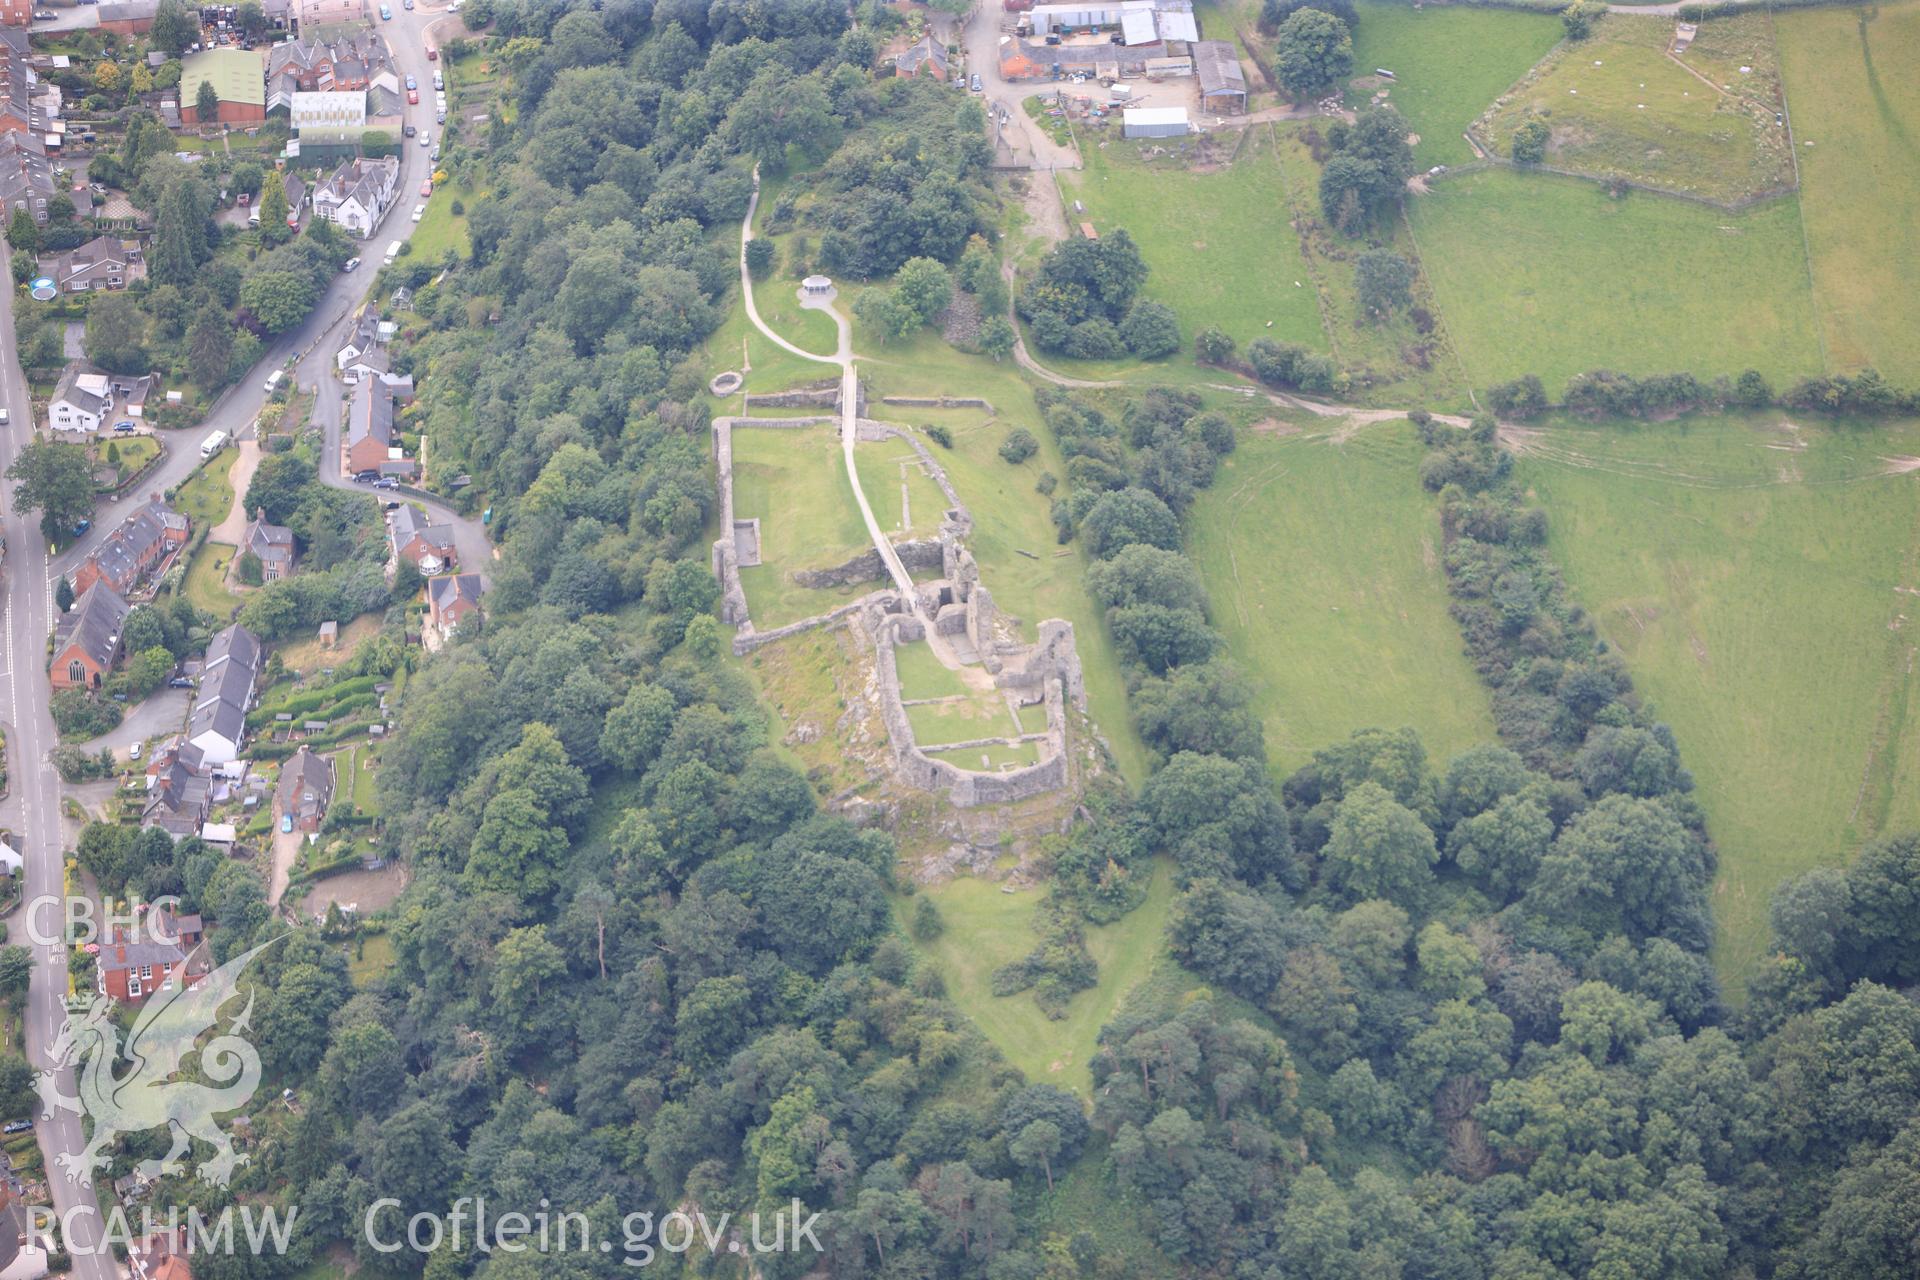 RCAHMW colour oblique photograph of Montgomery Castle. Taken by Toby Driver on 27/07/2012.